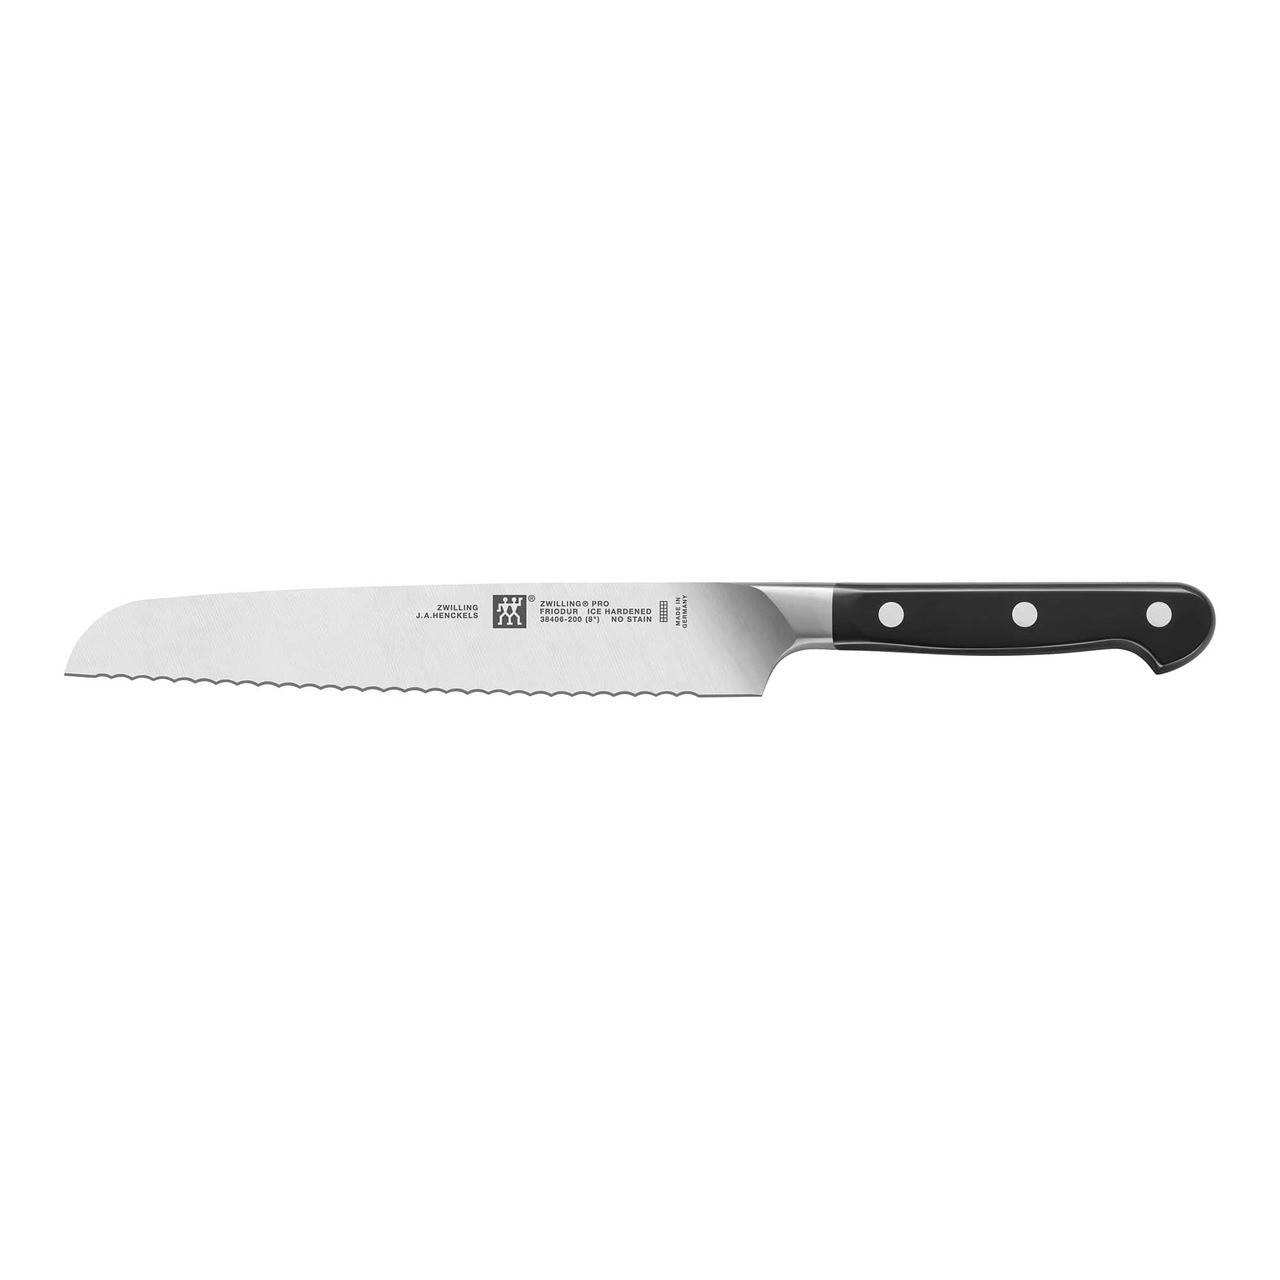 https://cdn11.bigcommerce.com/s-hccytny0od/images/stencil/1280x1280/products/673/1076/zwilling-pro-bread-knife__24678.1509981408.jpg?c=2?imbypass=on